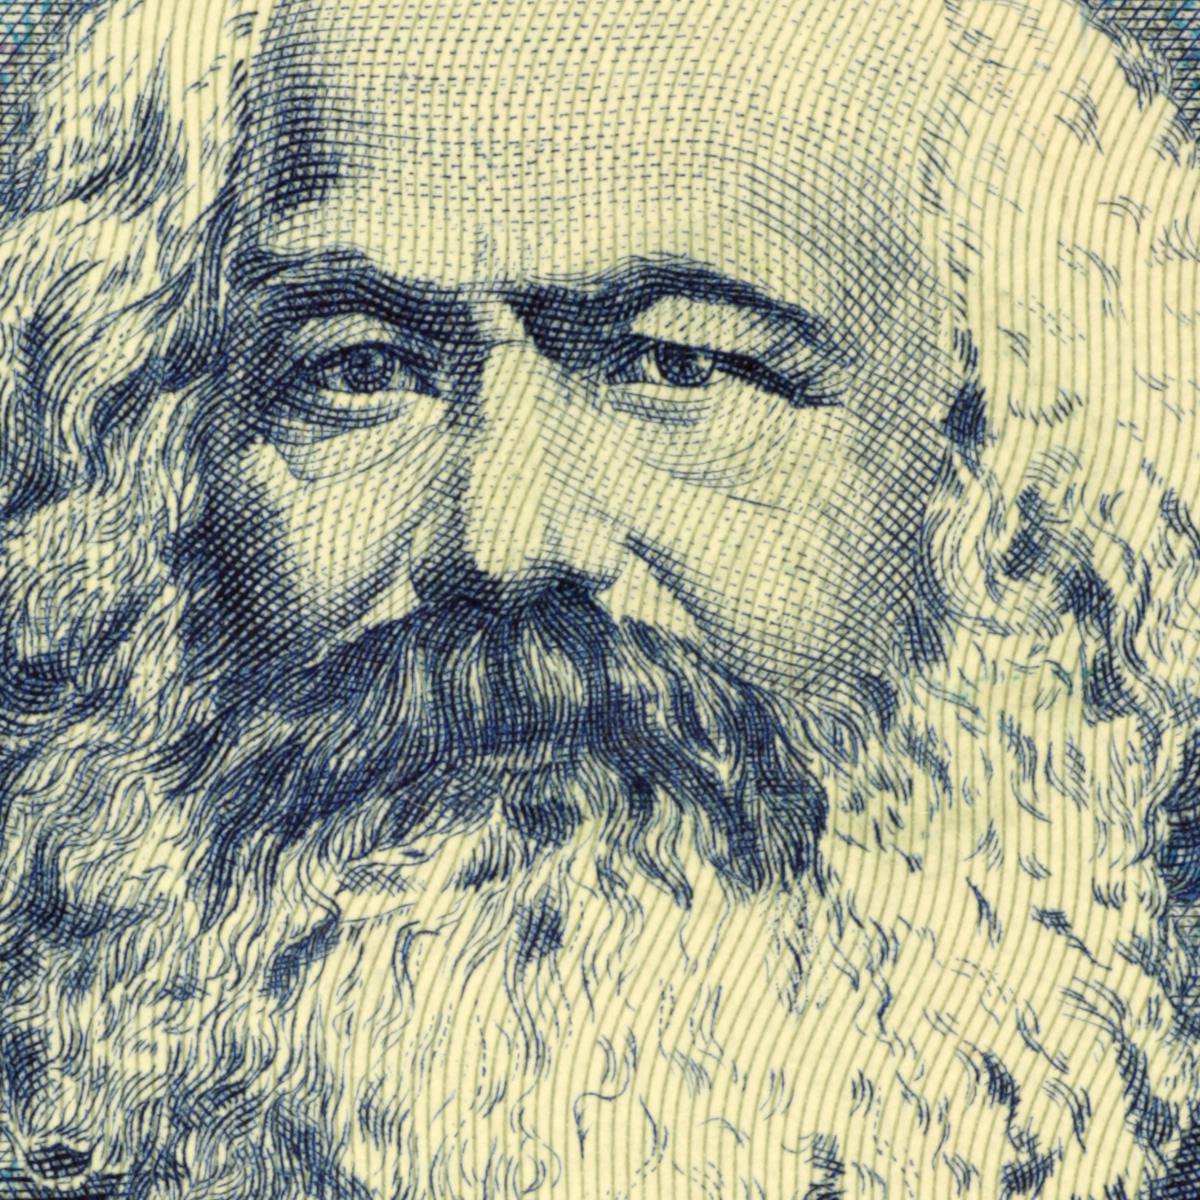 what is karl marx theory about power